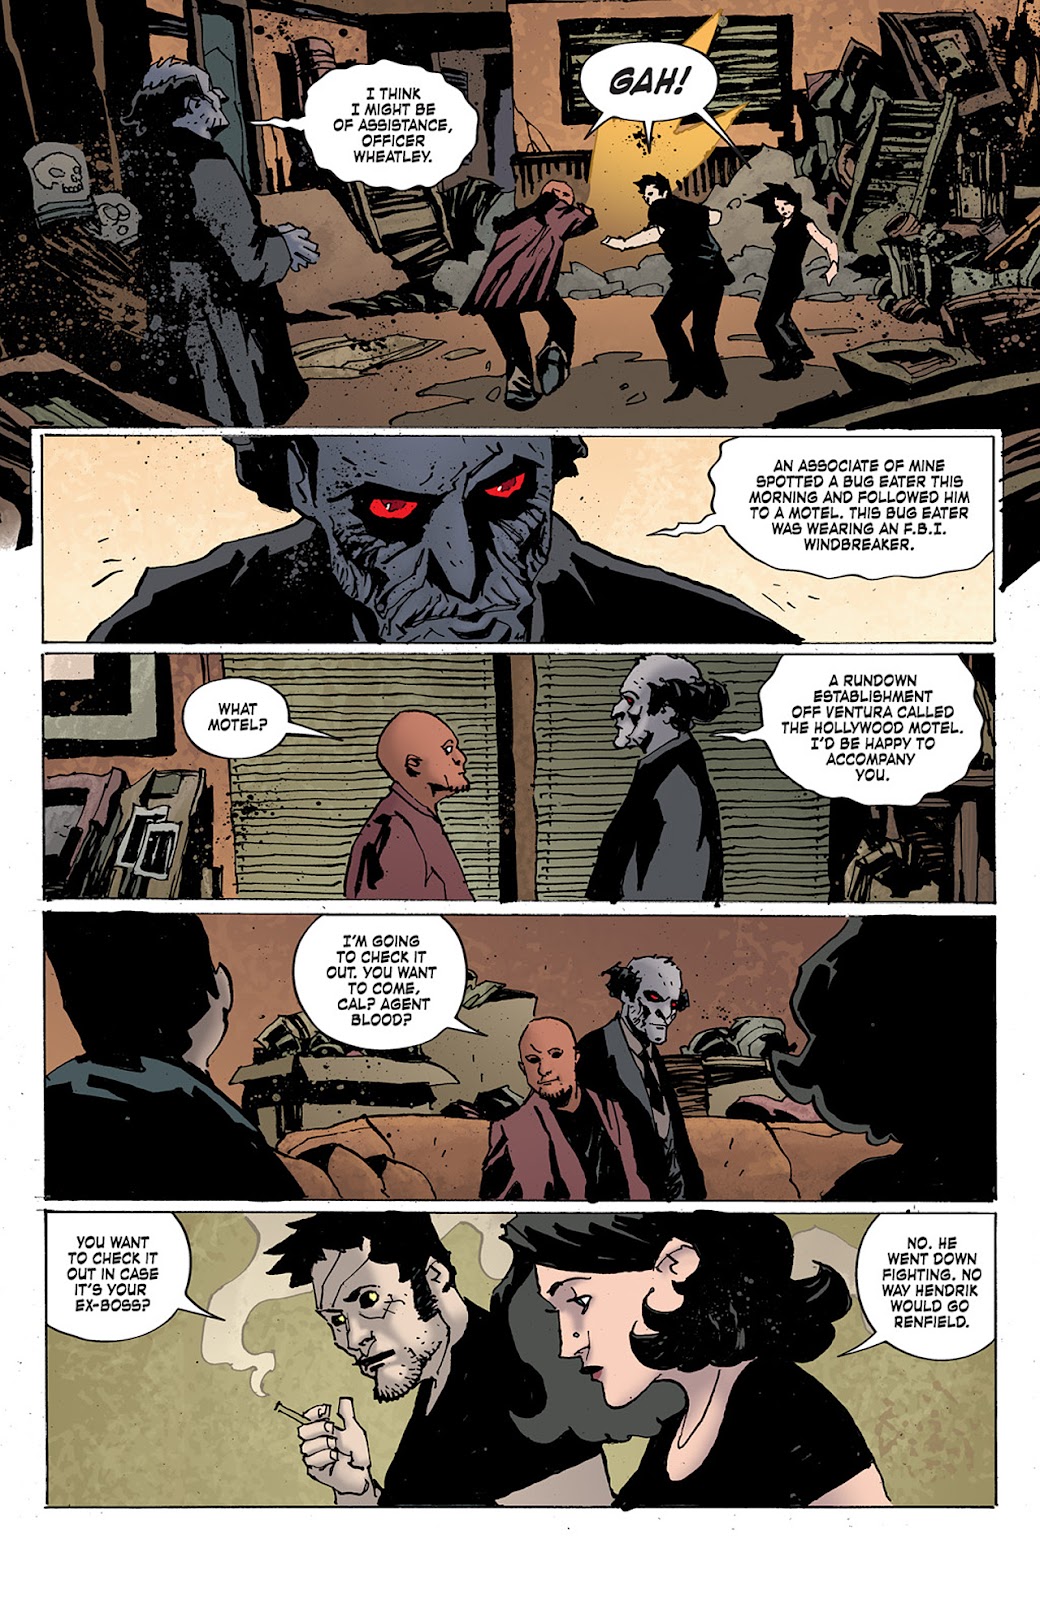 Criminal Macabre: Final Night - The 30 Days of Night Crossover issue 2 - Page 8